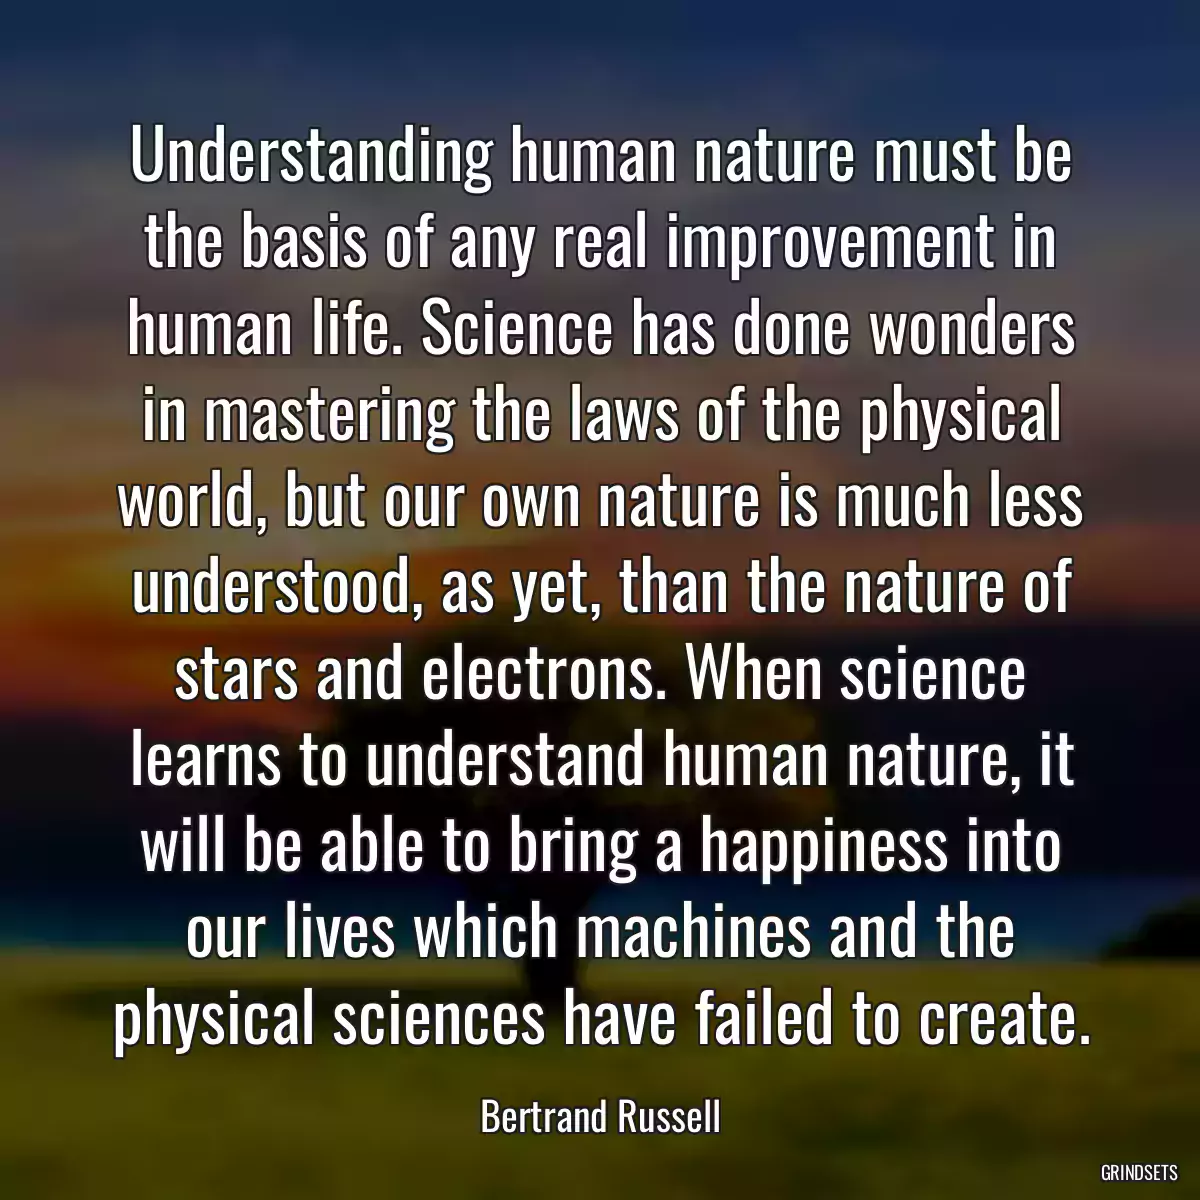 Understanding human nature must be the basis of any real improvement in human life. Science has done wonders in mastering the laws of the physical world, but our own nature is much less understood, as yet, than the nature of stars and electrons. When science learns to understand human nature, it will be able to bring a happiness into our lives which machines and the physical sciences have failed to create.